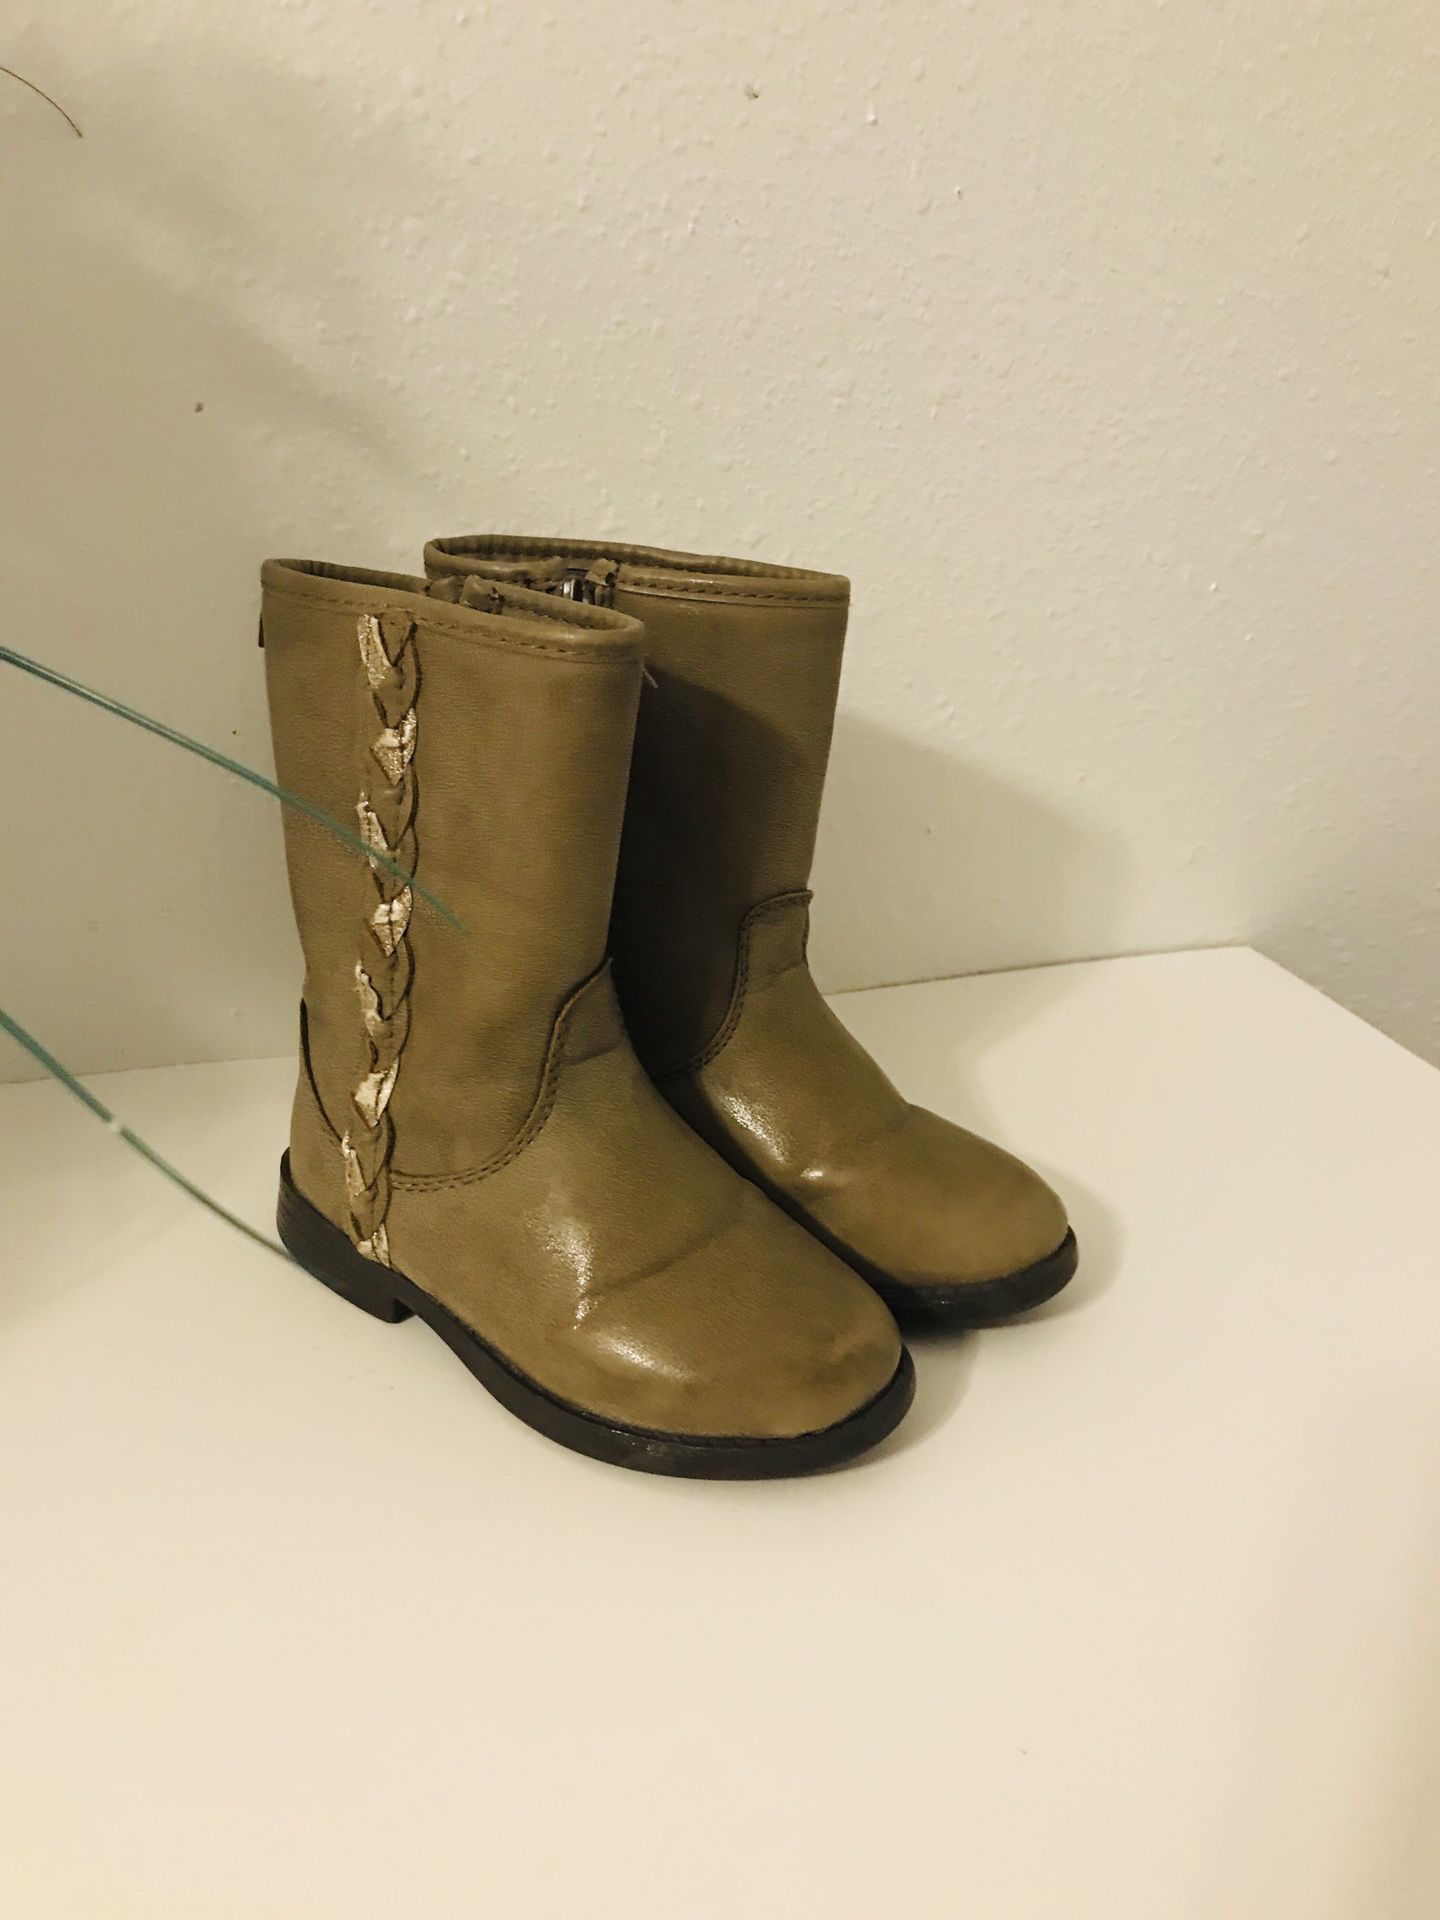 Toddler Girls Boots — size 9 M